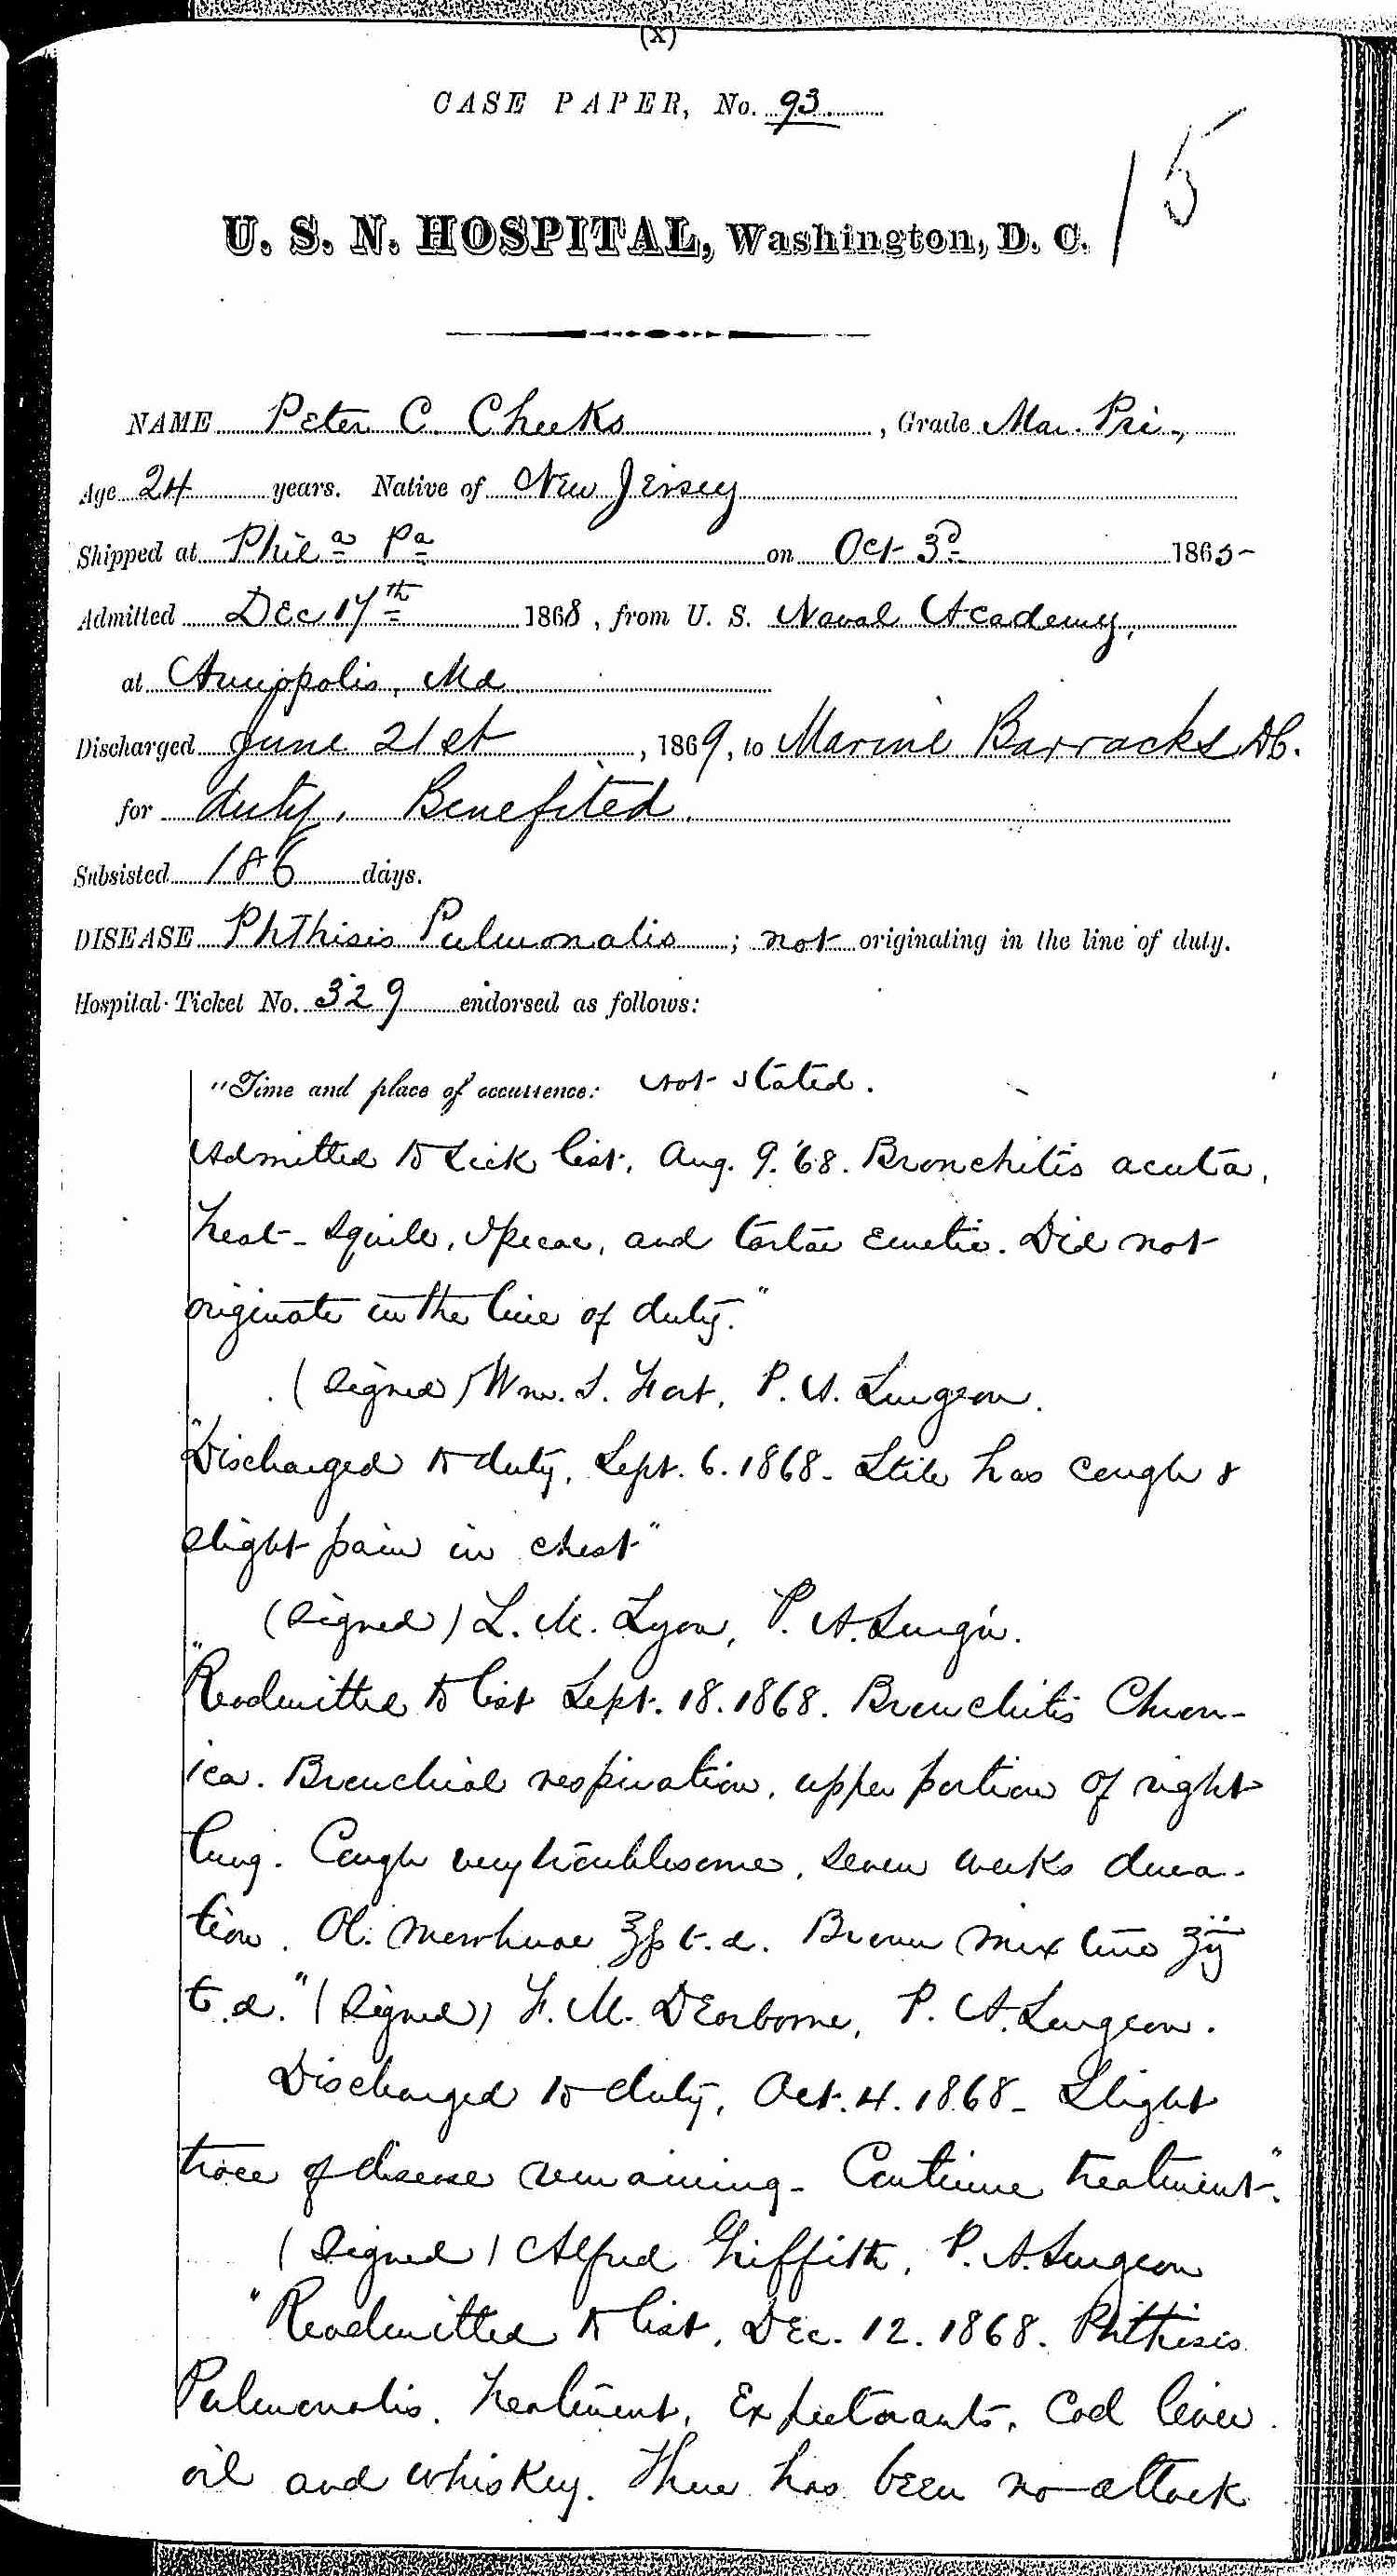 Entry for Peter C. Cheeks (page 1 of 16) in the log Hospital Tickets and Case Papers - Naval Hospital - Washington, D.C. - 1868-69